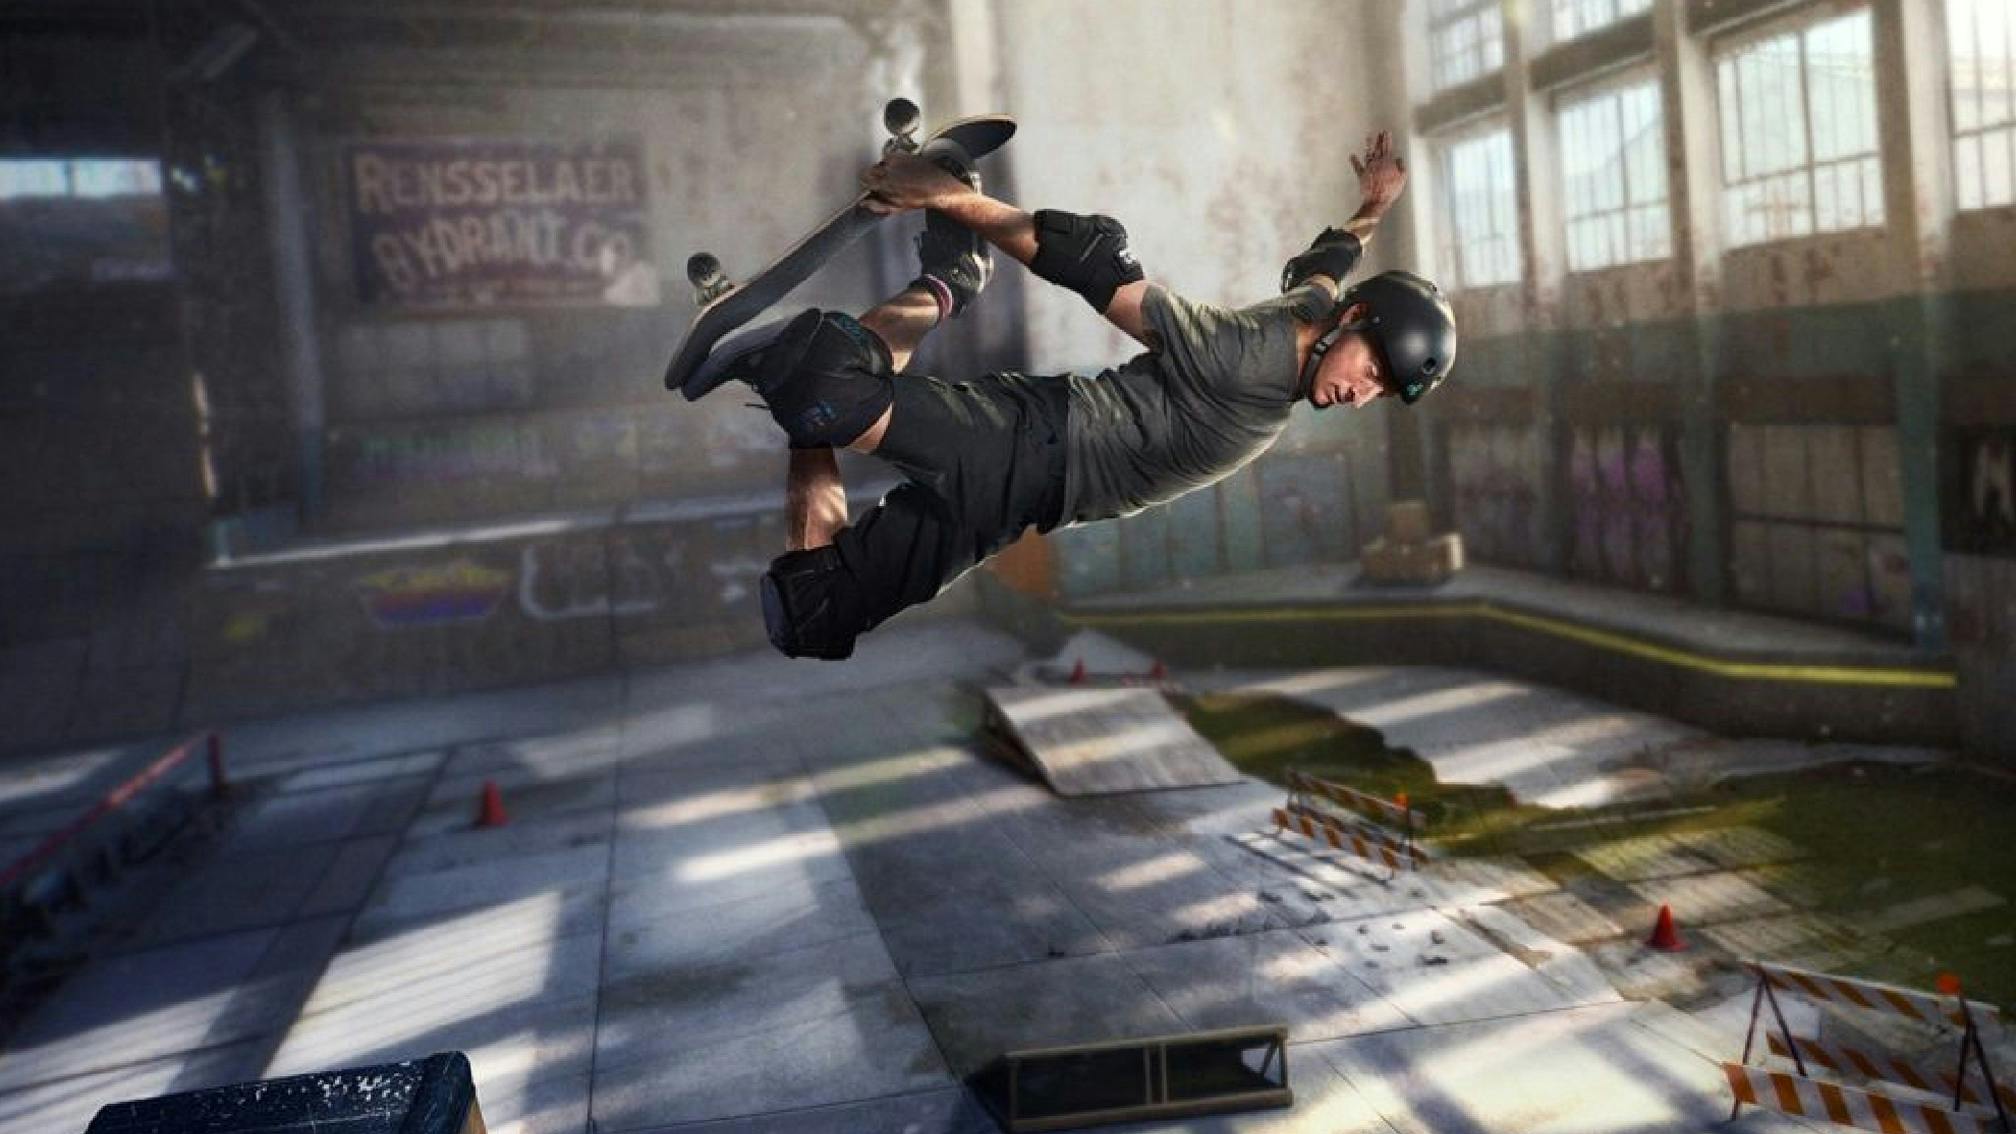 Here Are All The New Songs That Will Feature On The Tony Hawk's Pro Skater 1 + 2 Soundtrack